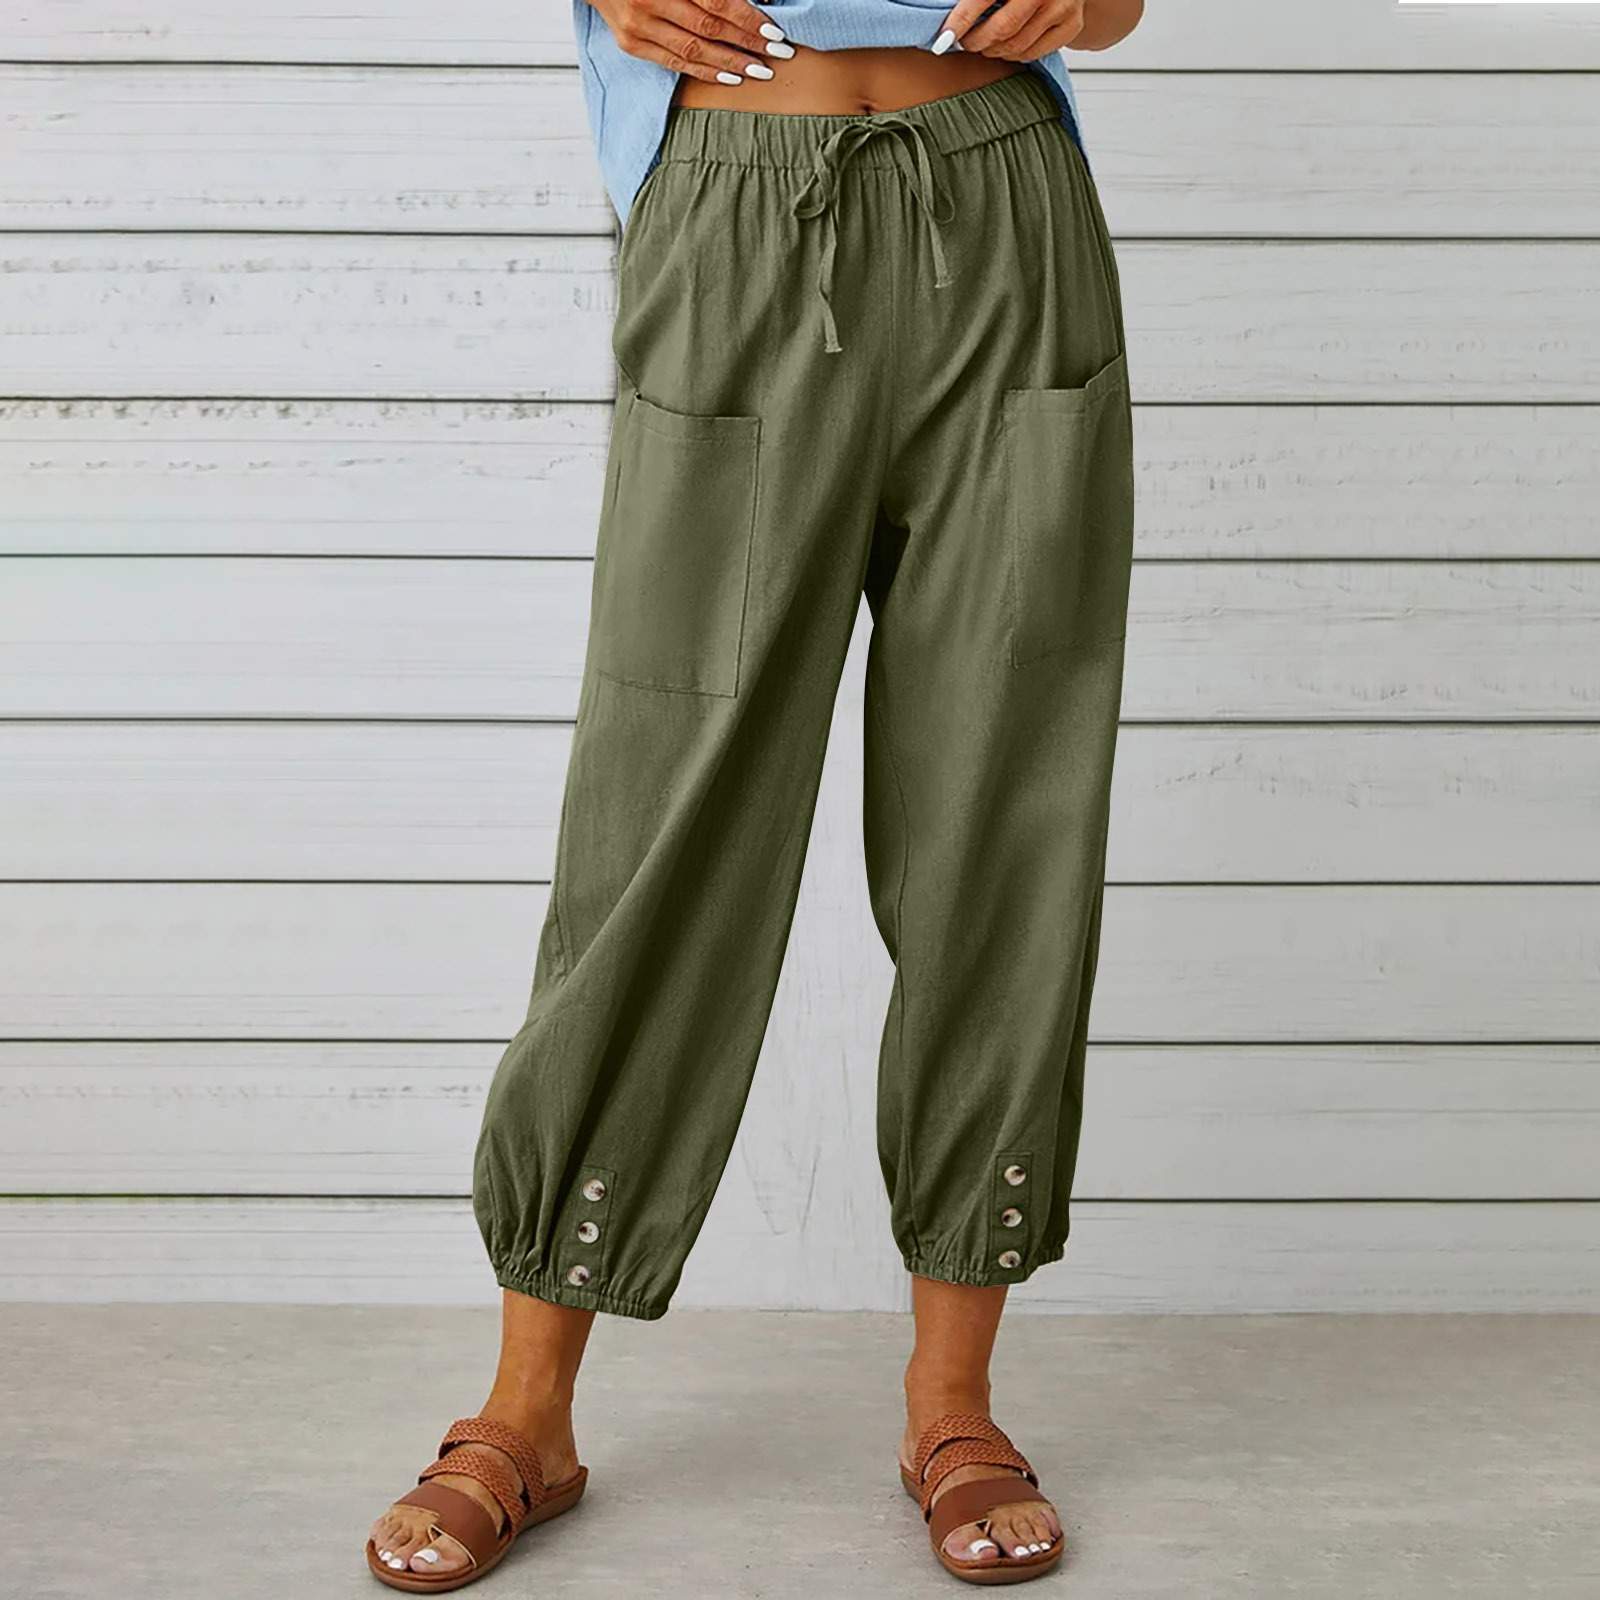 2023 New Europe and America Cross Border Amazon Wish Loose High Waist Button Cotton and Linen Trousers Cropped Pants Wide Leg Women's Pants